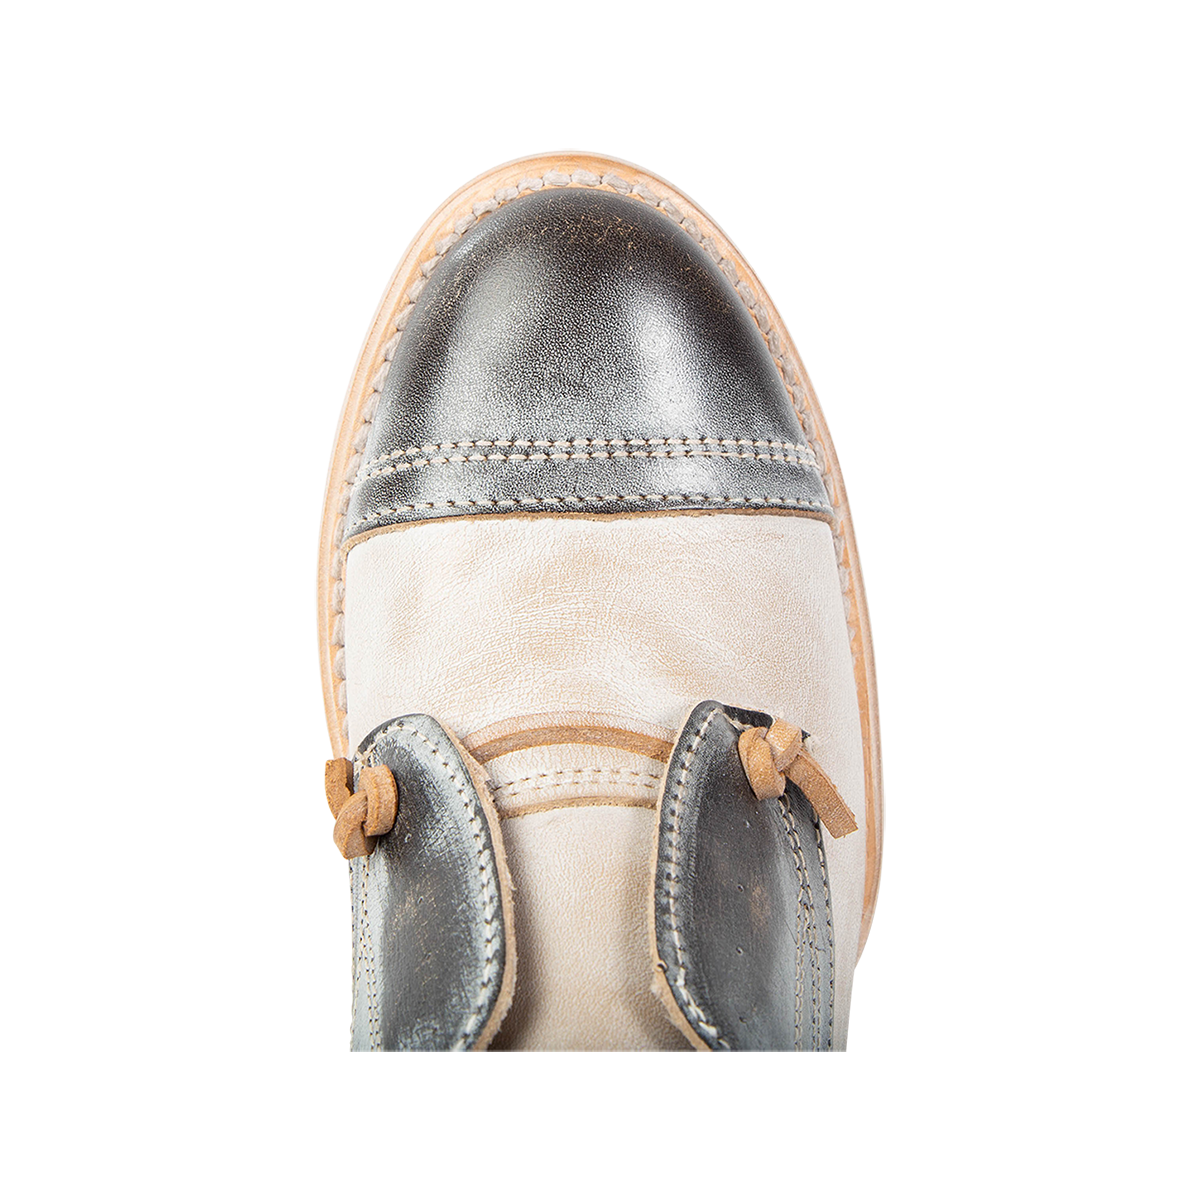 Top view showing almond toe and decorative knotted leather lace on FREEBIRD women's Mabel ice multi shoe